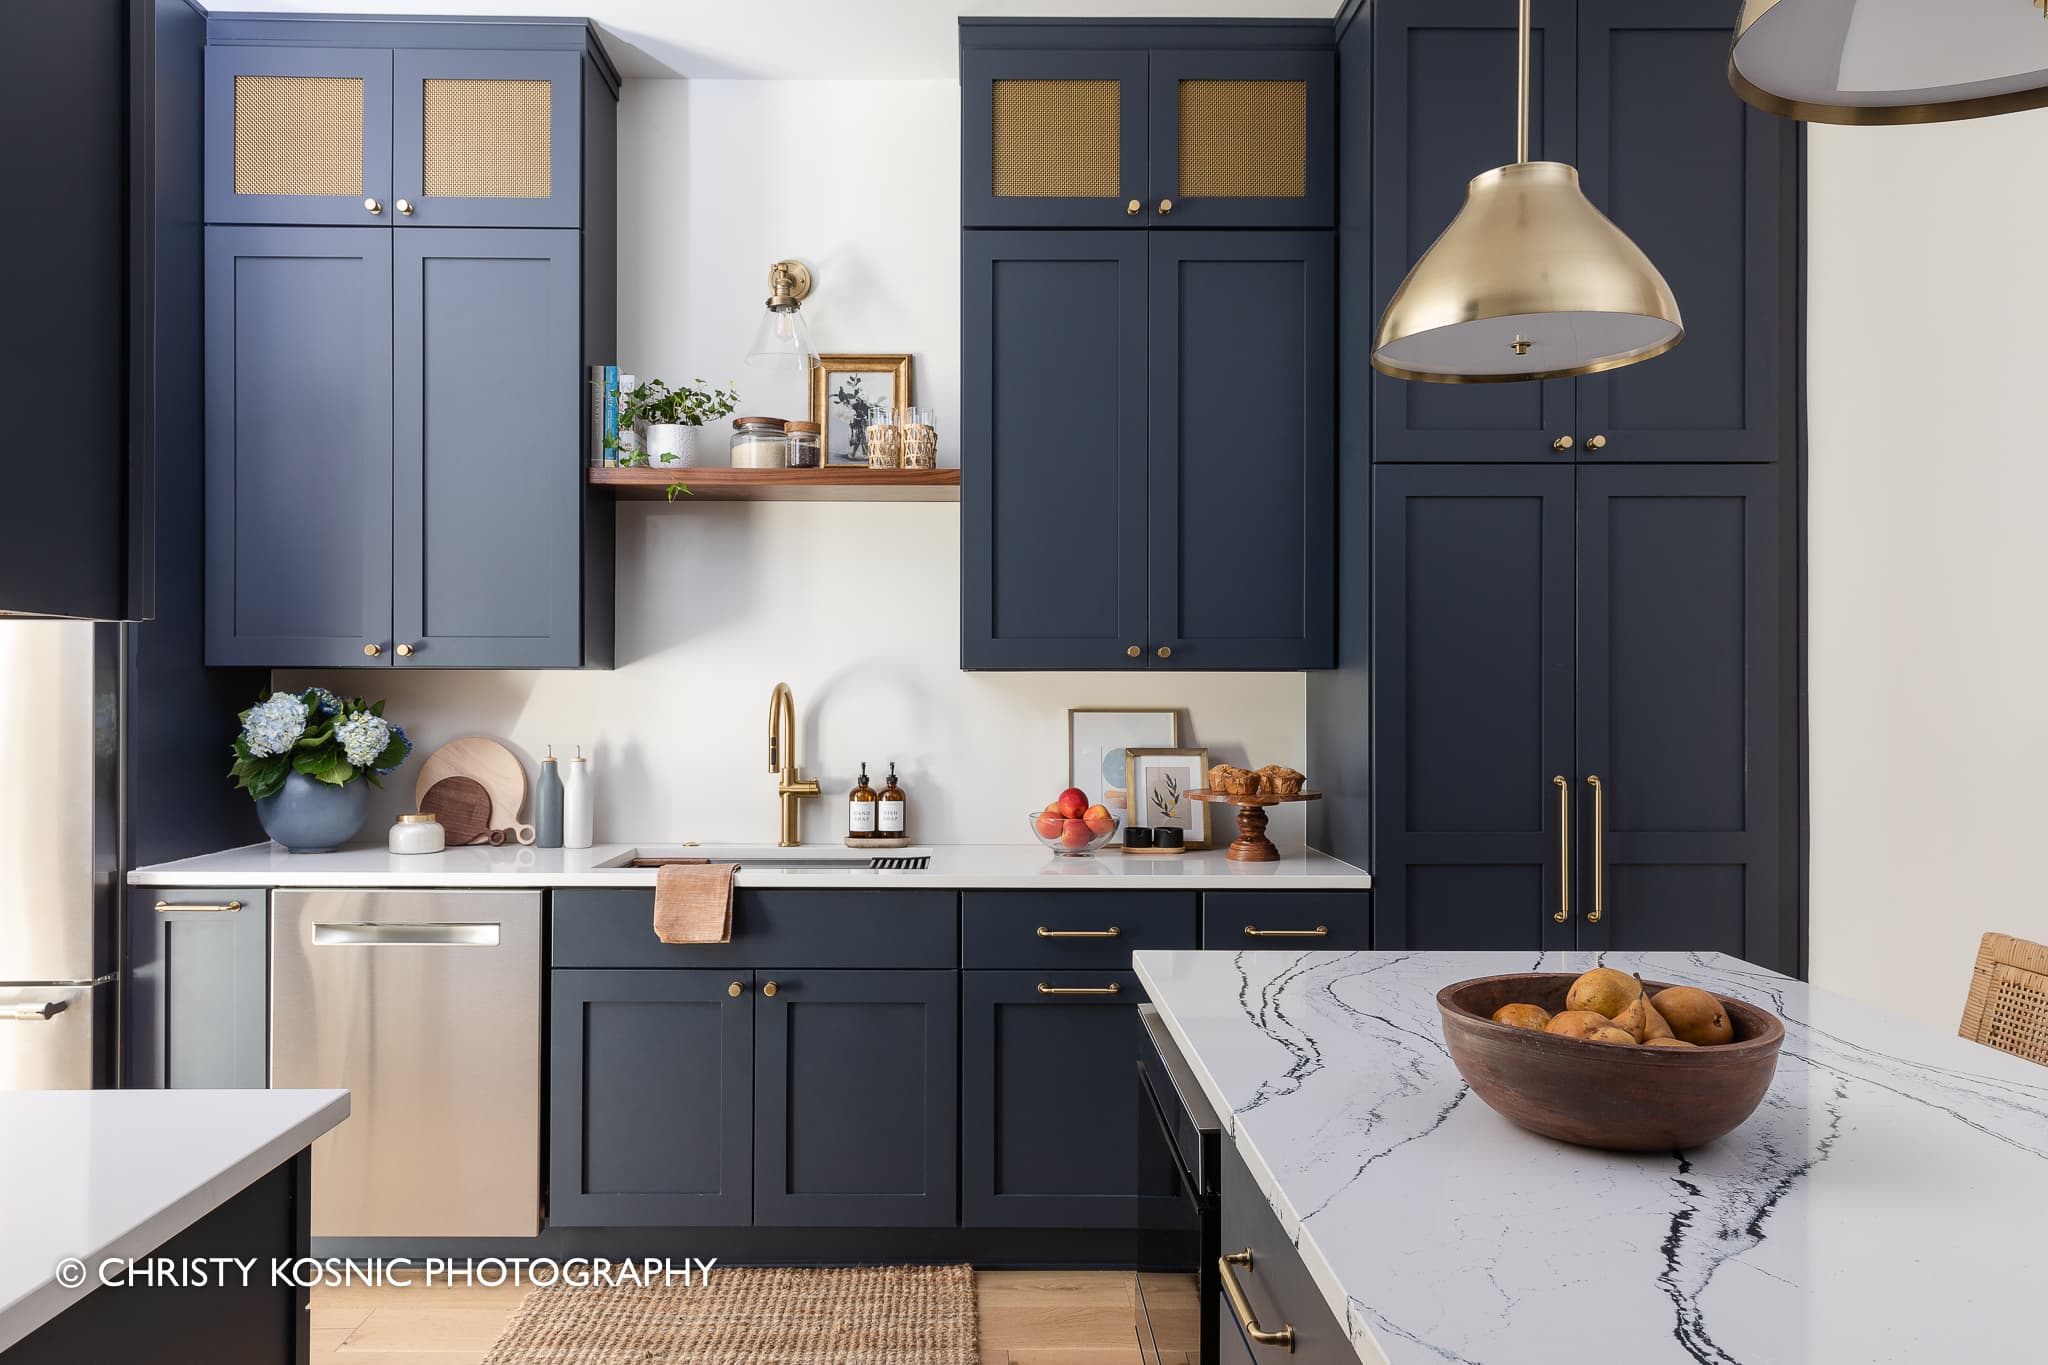 The Top Kitchen Design Trends to Look Out For in 20, According ...